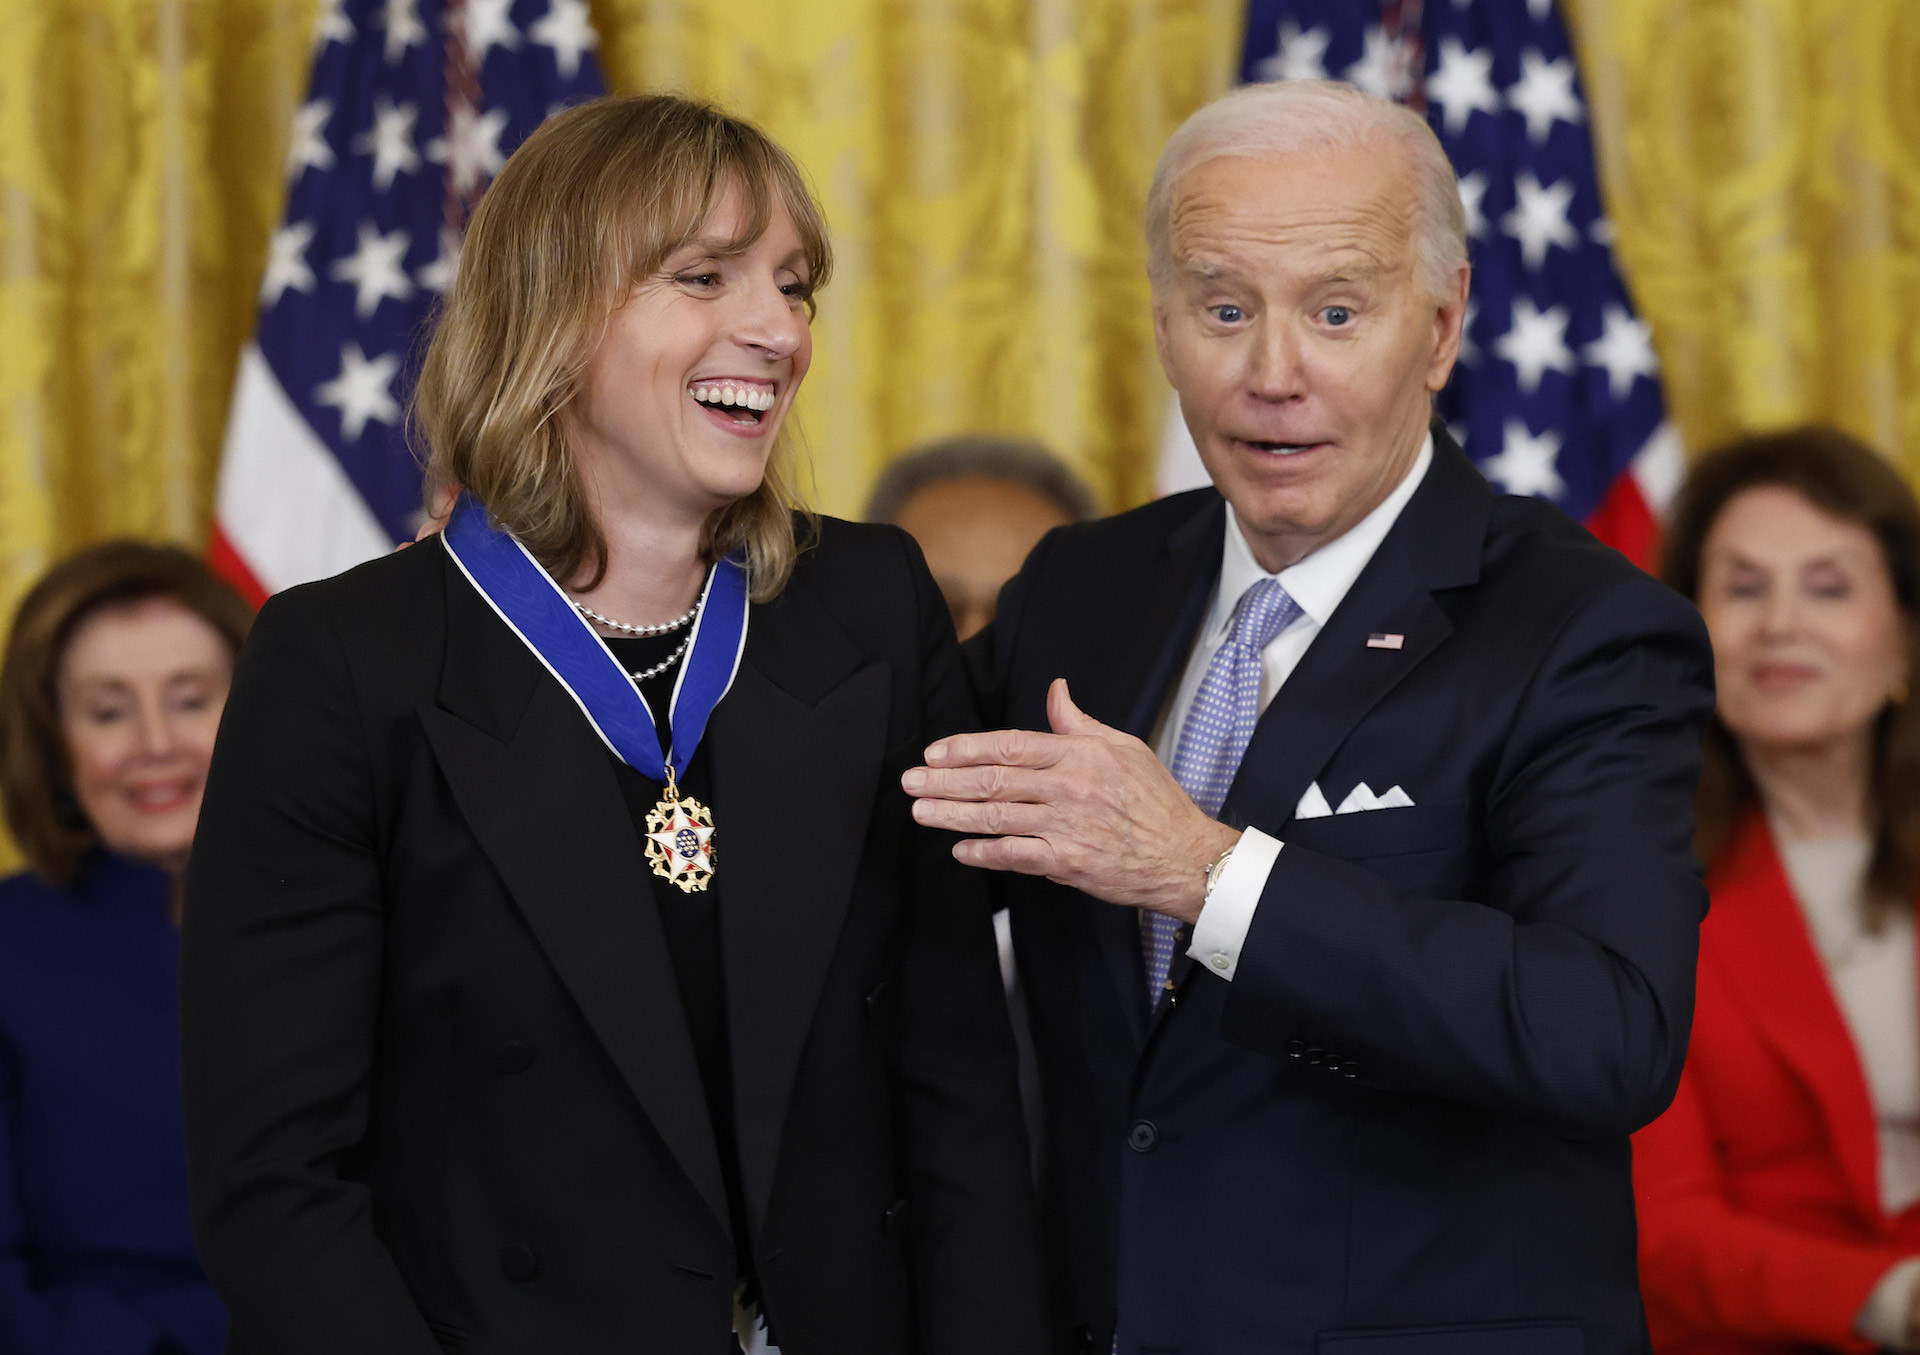 Olympic swimming great Katie Ledecky receives Presidential Medal of Freedom